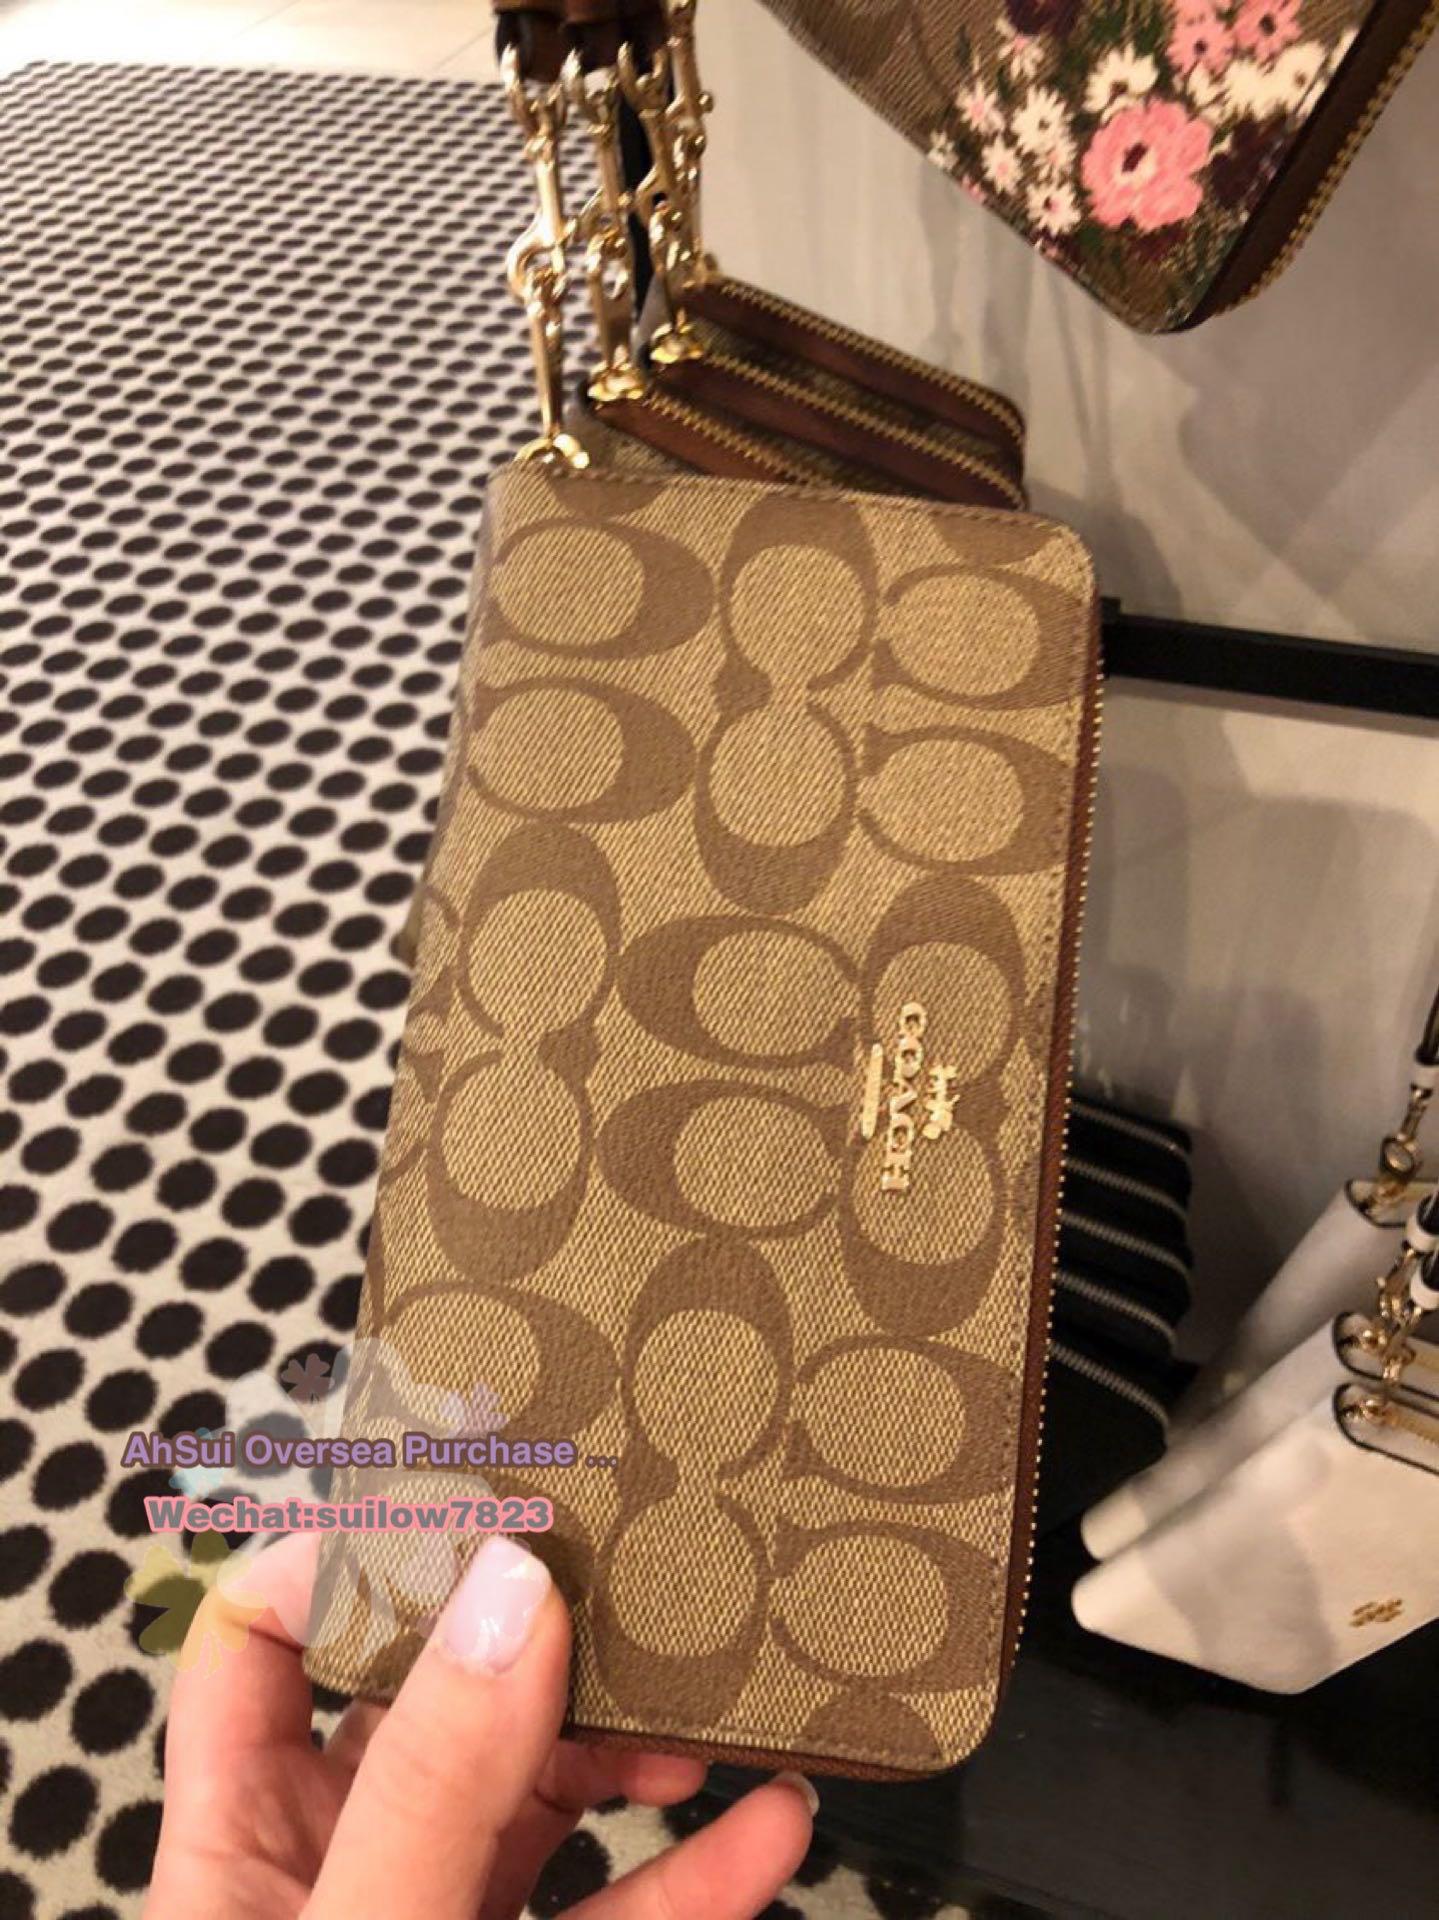 Coach Outlet Long Zip Around Wallet Wristlet In Signature Canvas